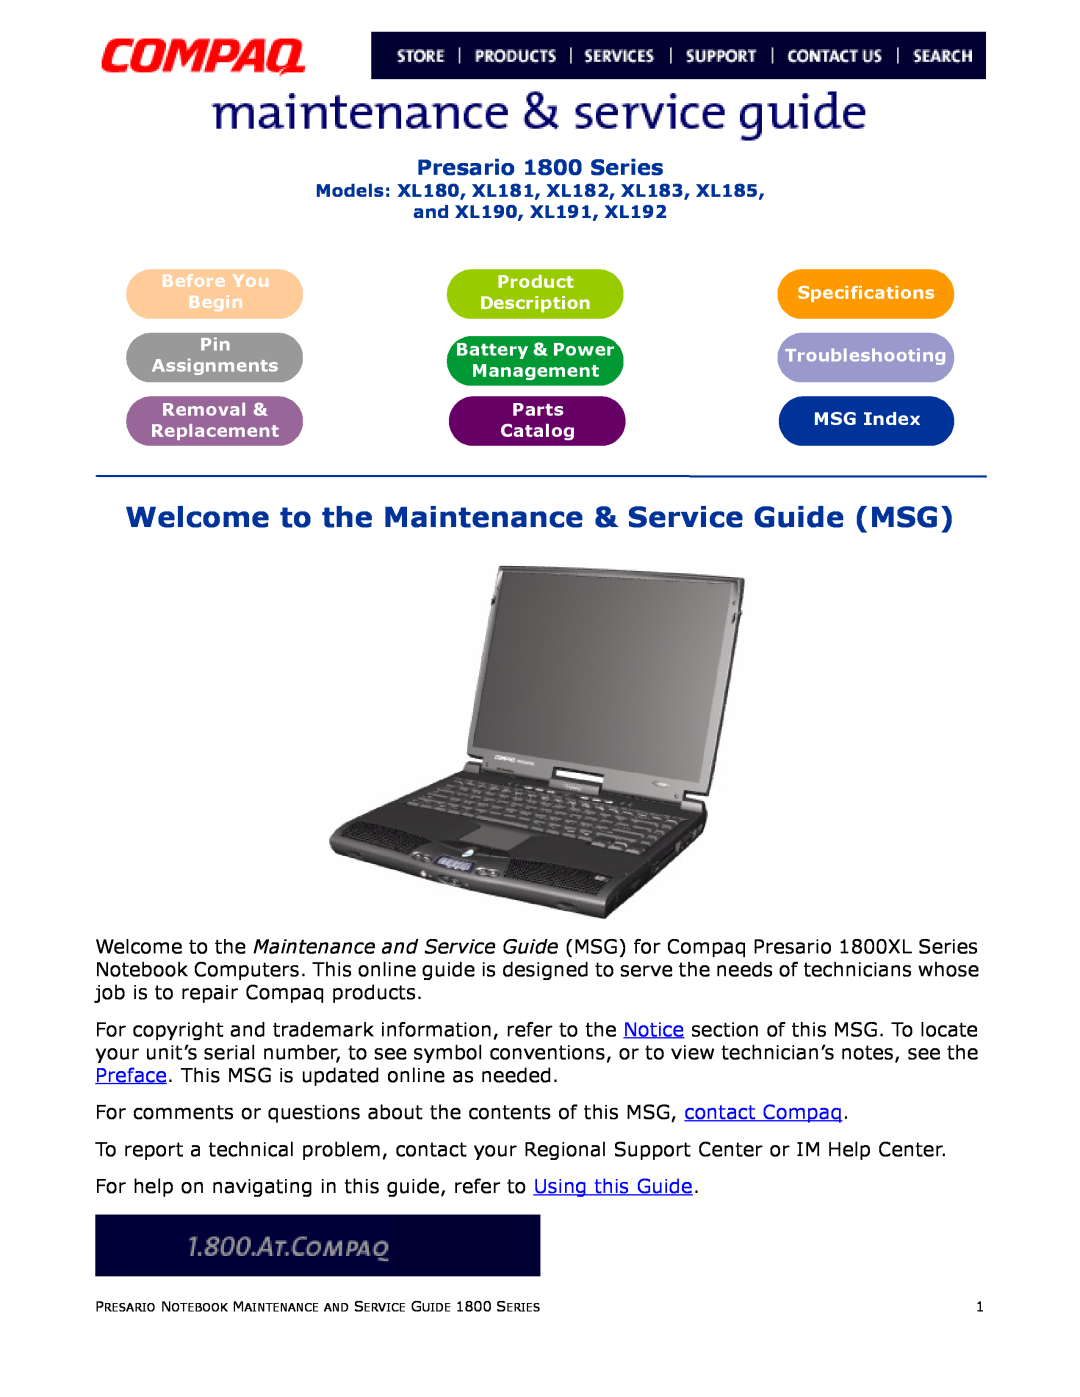 Compaq XL180, XL190, XL191, XL192, XL183 specifications Presario 1800 Series, Welcome to the Maintenance & Service Guide MSG 